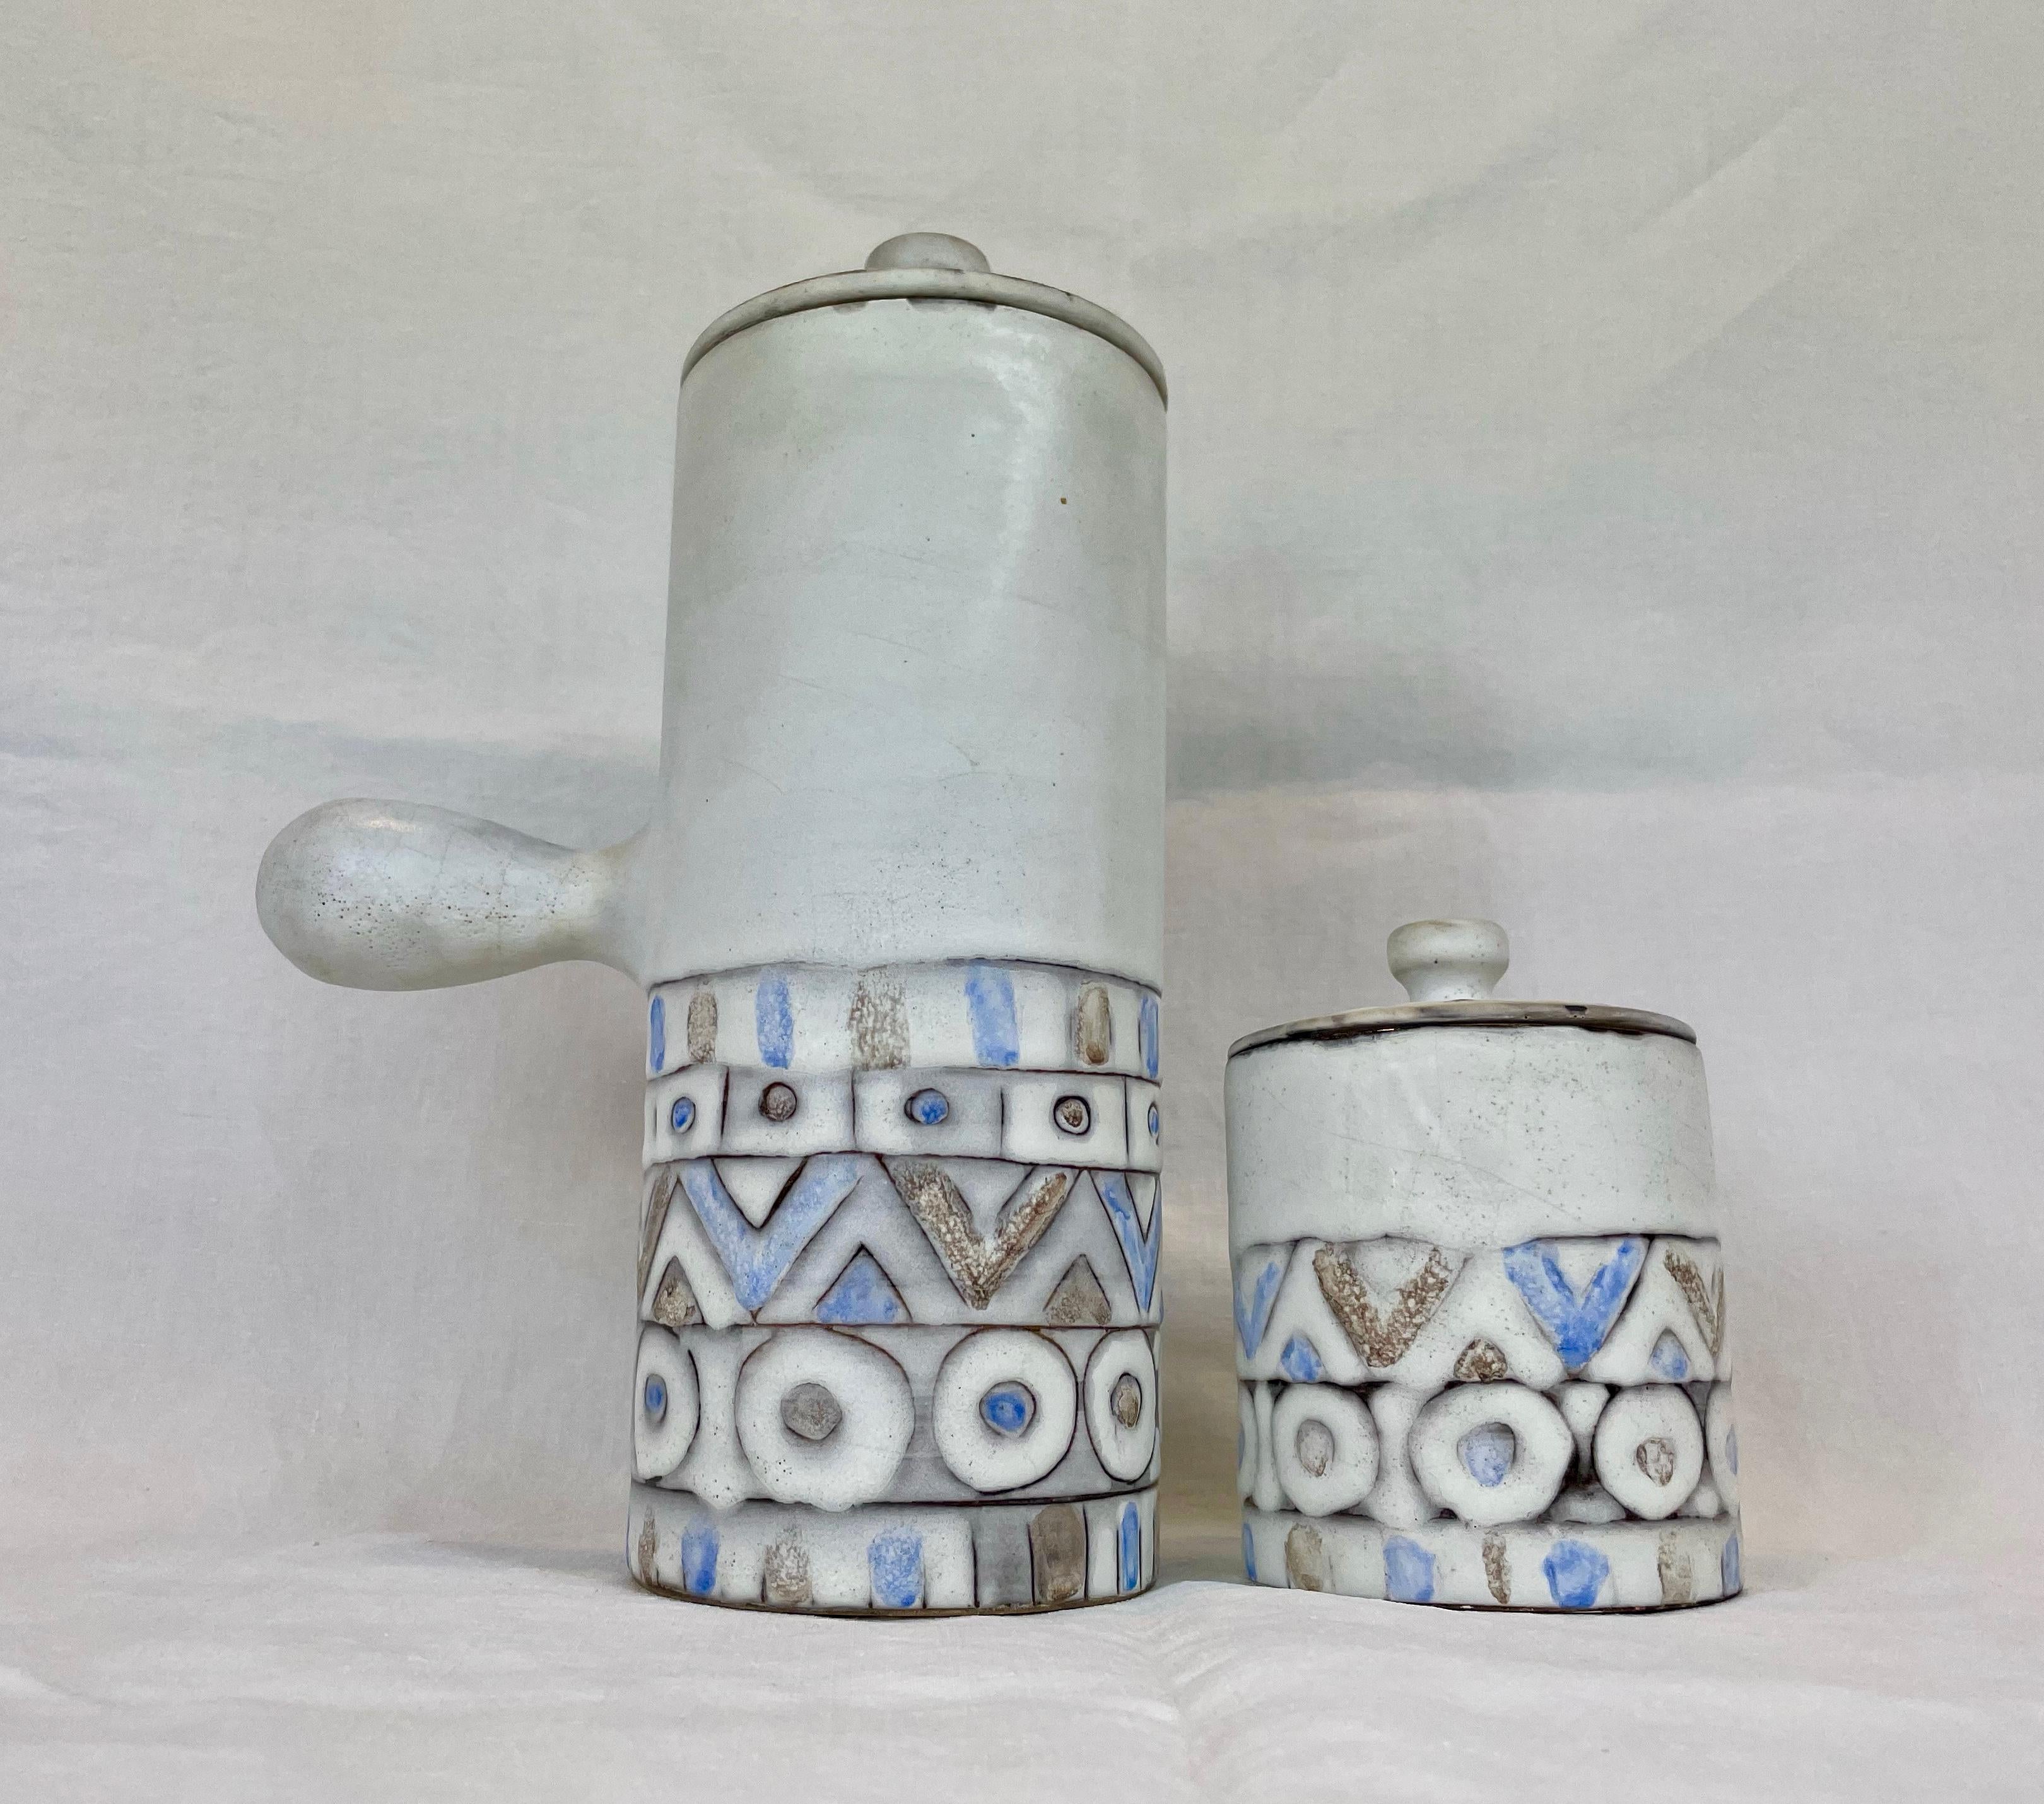 Vallauris Hot Chocolate Set by Alain Maunier 1960s For Sale 5